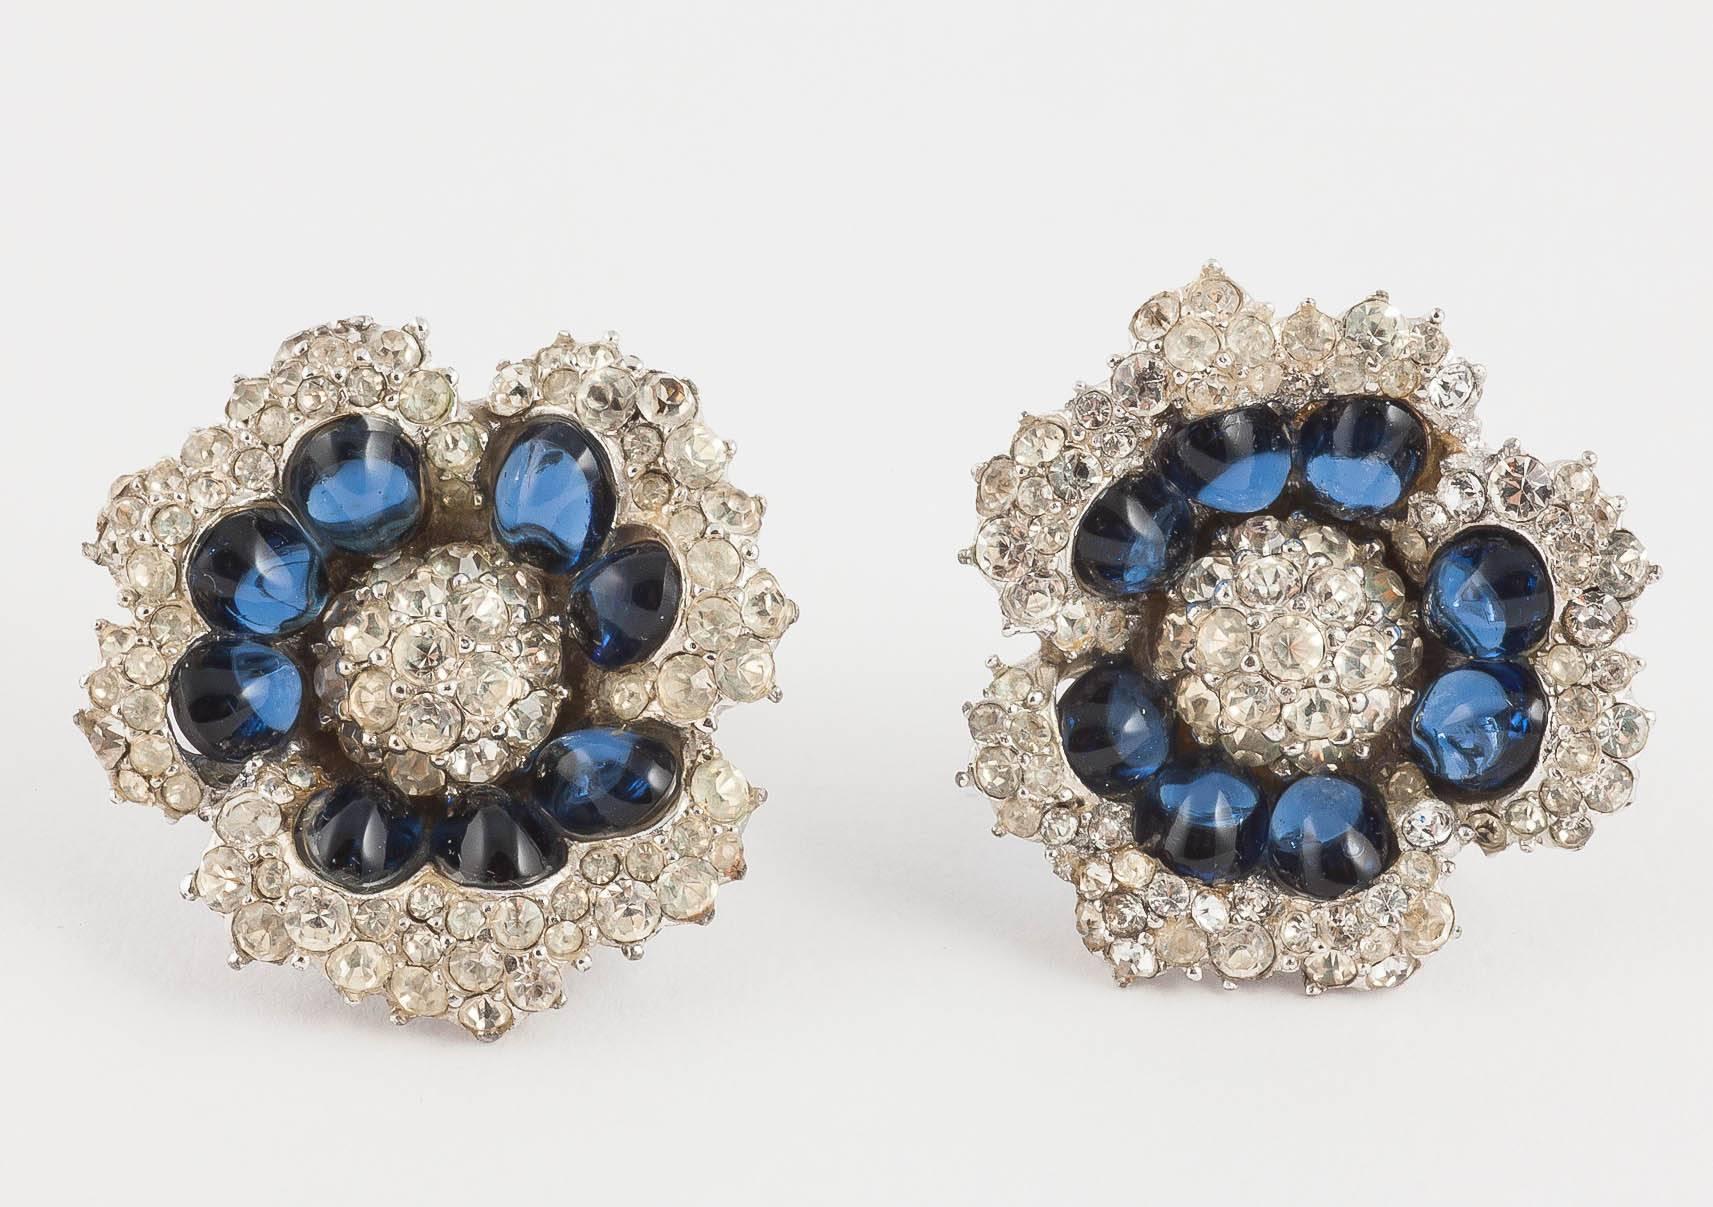 Wonderfully chic and sumptuous 'flower' brooch with matching earrings, by Marcel Boucher from the 1960s, perhaps one of his most elegant designs. Made from sapphire paste cabuchons, clear pastes and pearl, this design recalls the marvellous designs